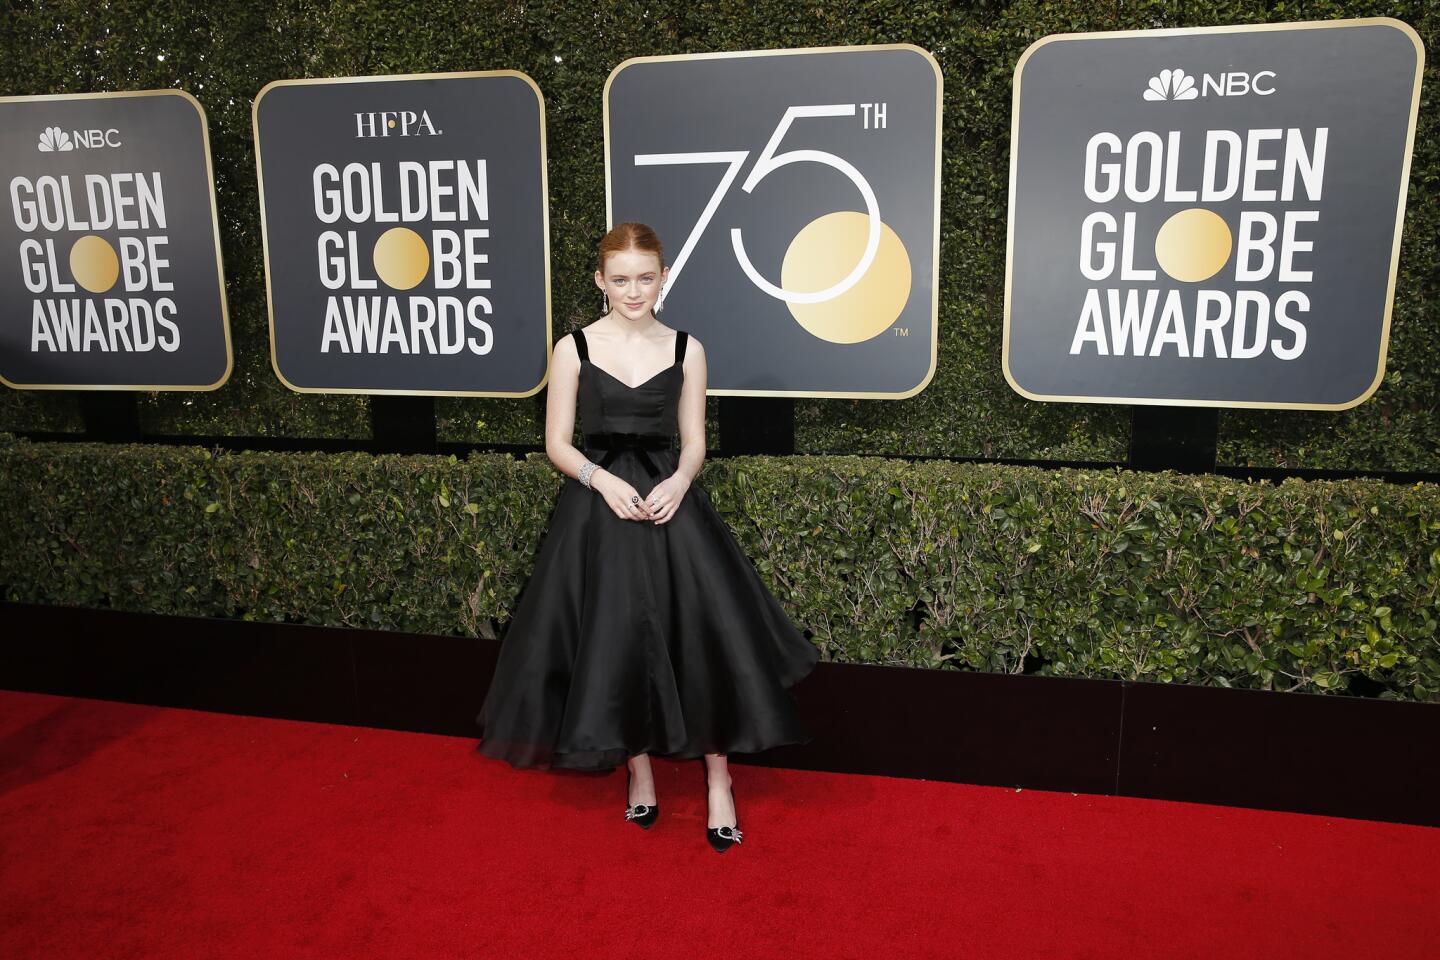 Sadie Sink arrives at the 75th annual Golden Globe Awards at the Beverly Hilton Hotel on Sunday in Beverly Hills, Calif.